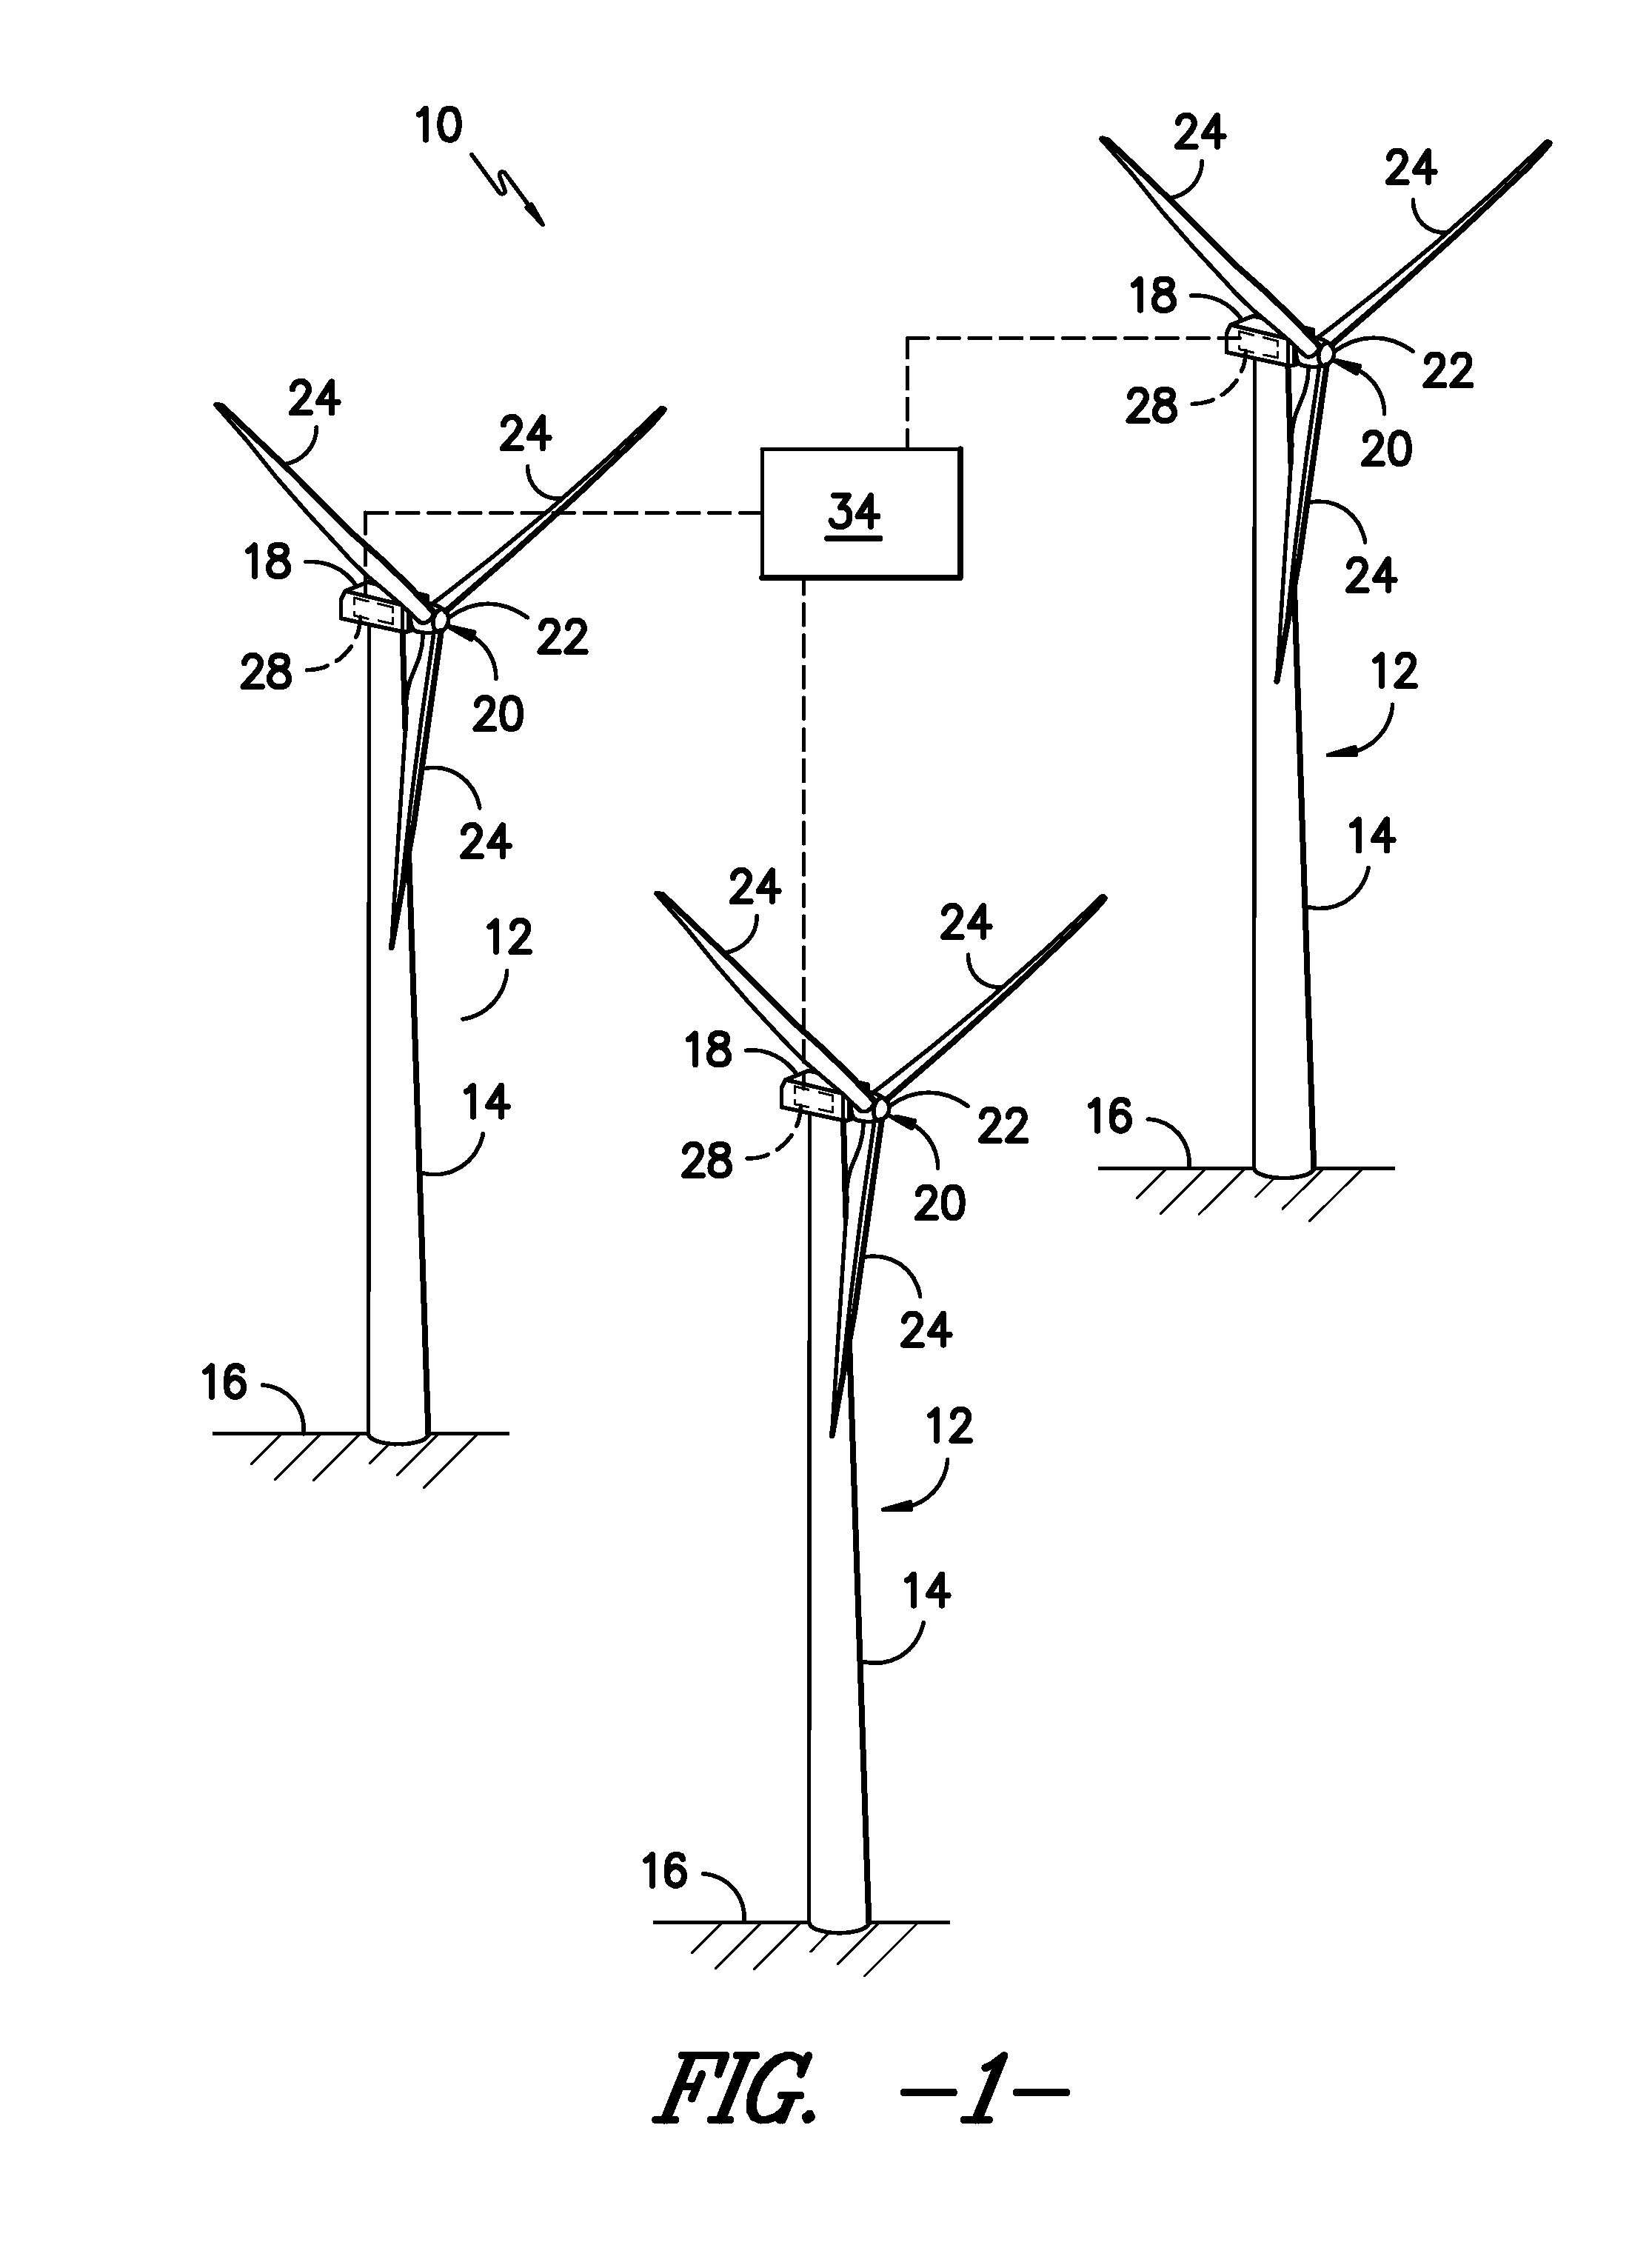 System and methods for controlling the amplitude modulation of noise generated by wind turbines